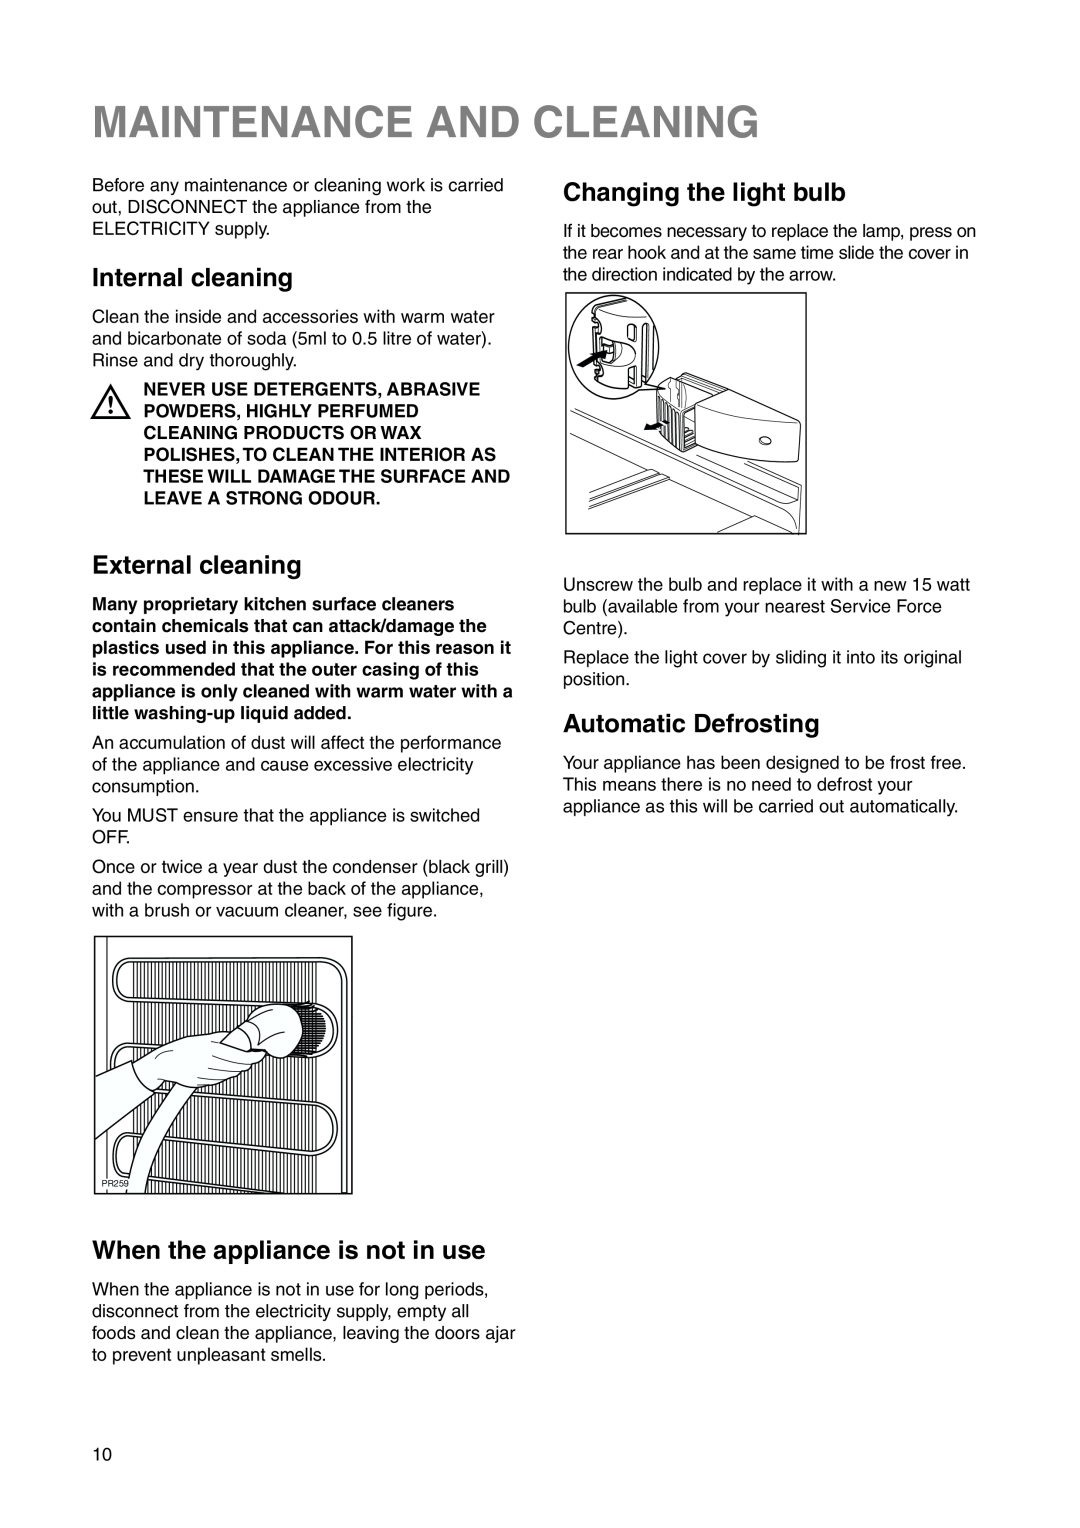 Zanussi ZRB 2925 S manual Maintenance And Cleaning, Internal cleaning, External cleaning, When the appliance is not in use 